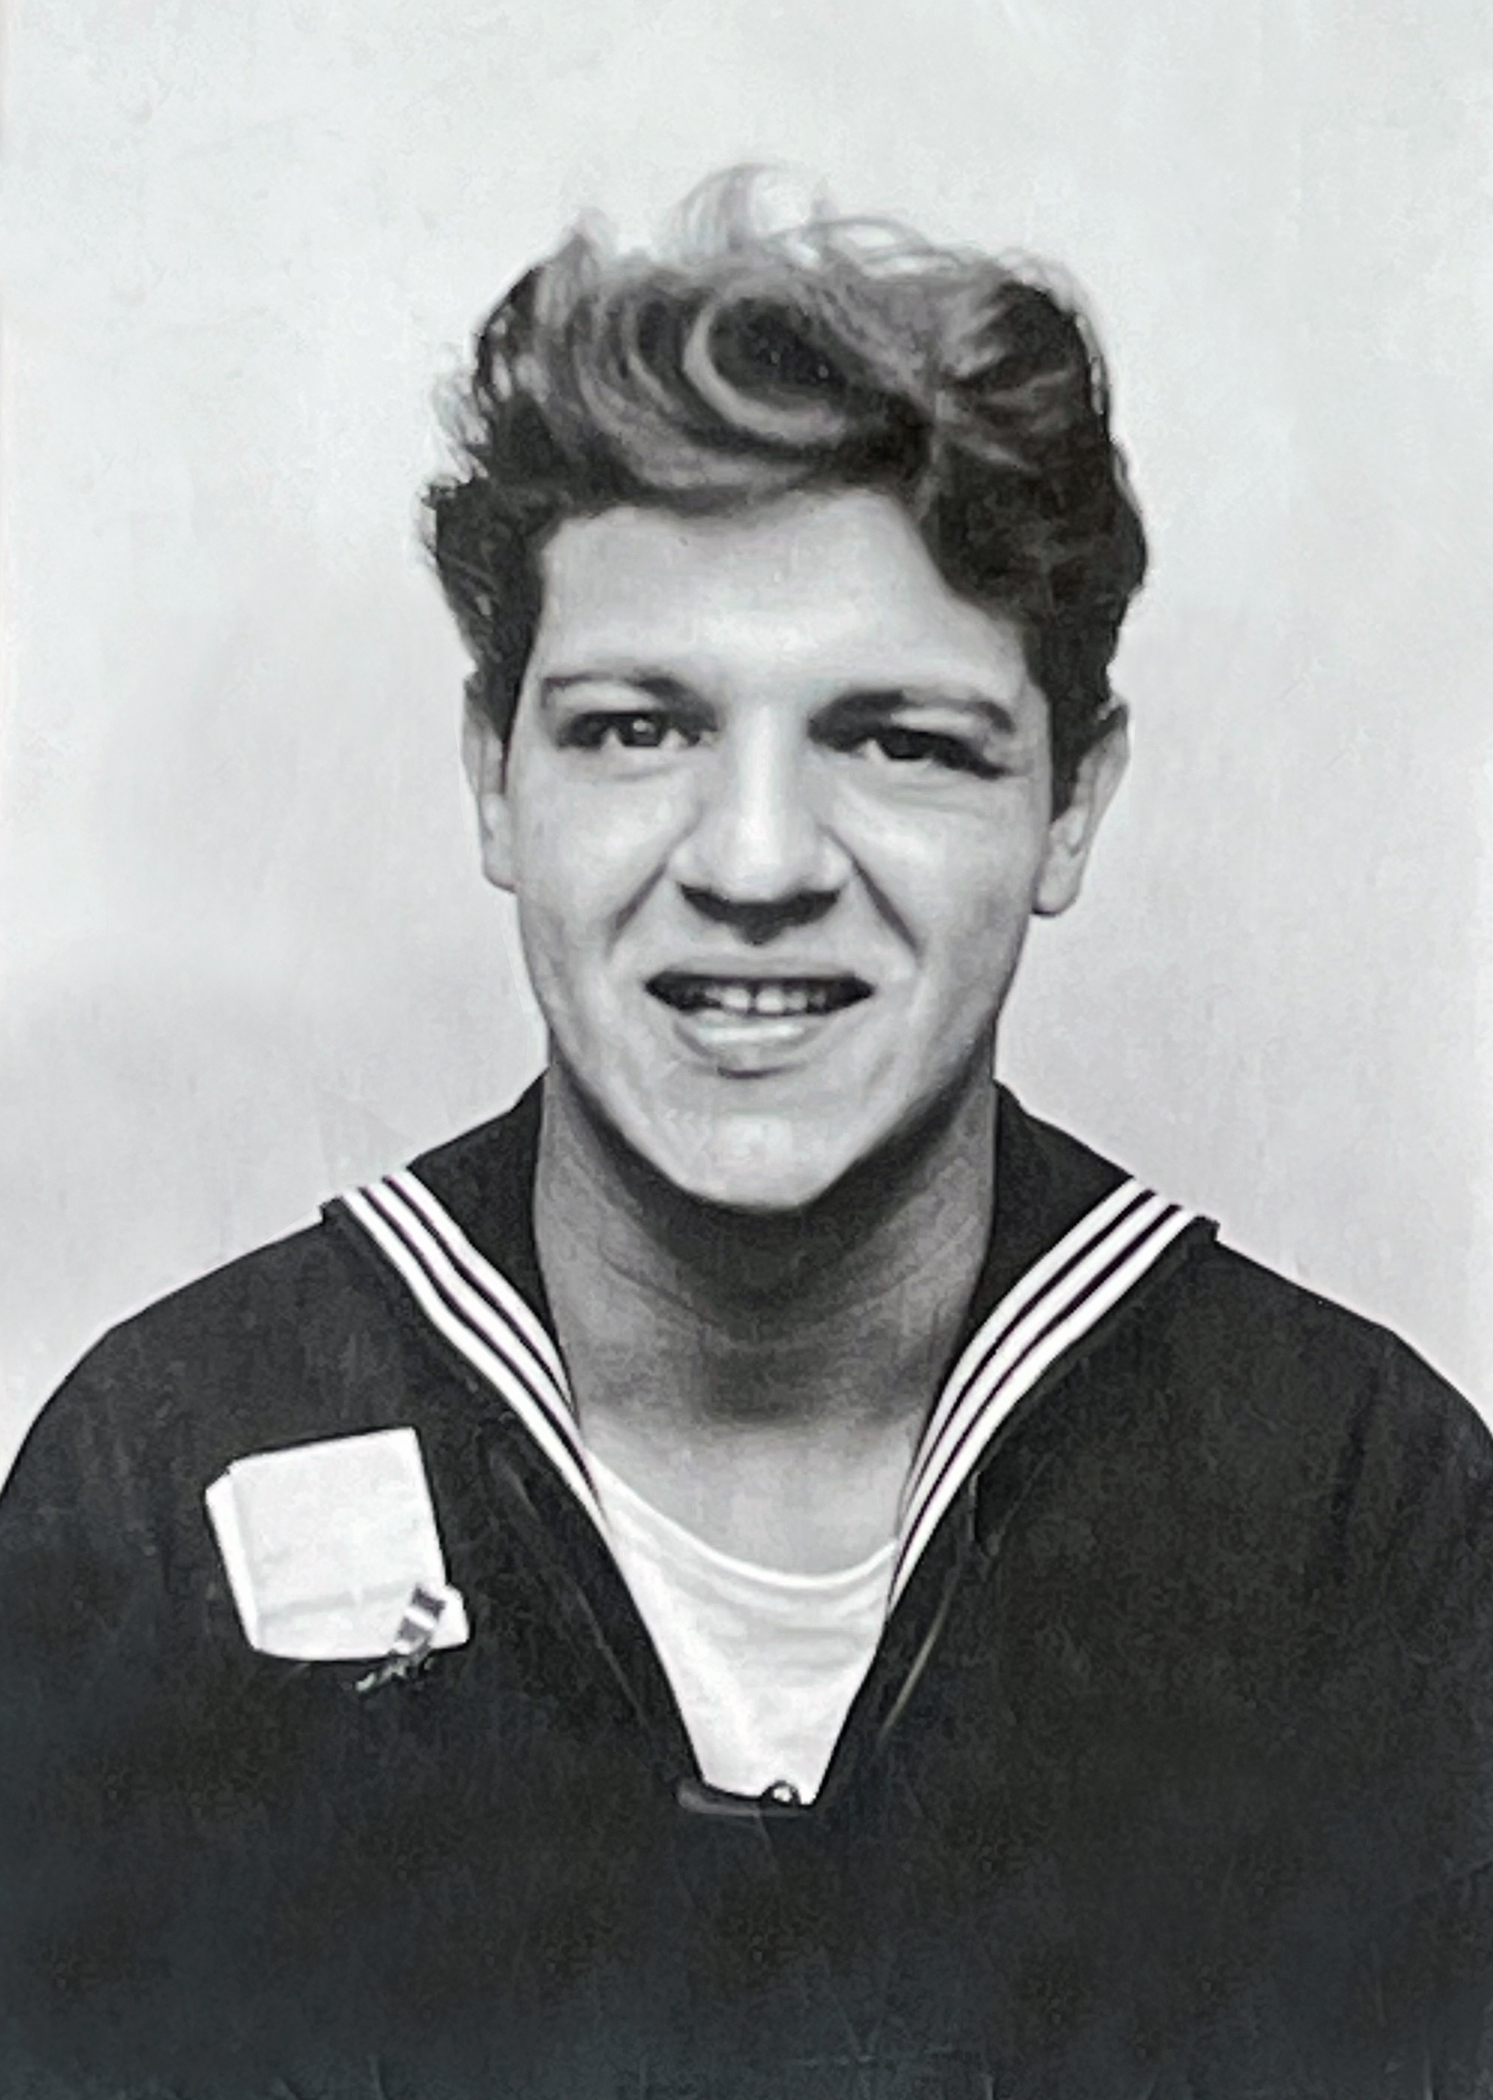 Photo of Conrad Policastro while serving in the US Navy